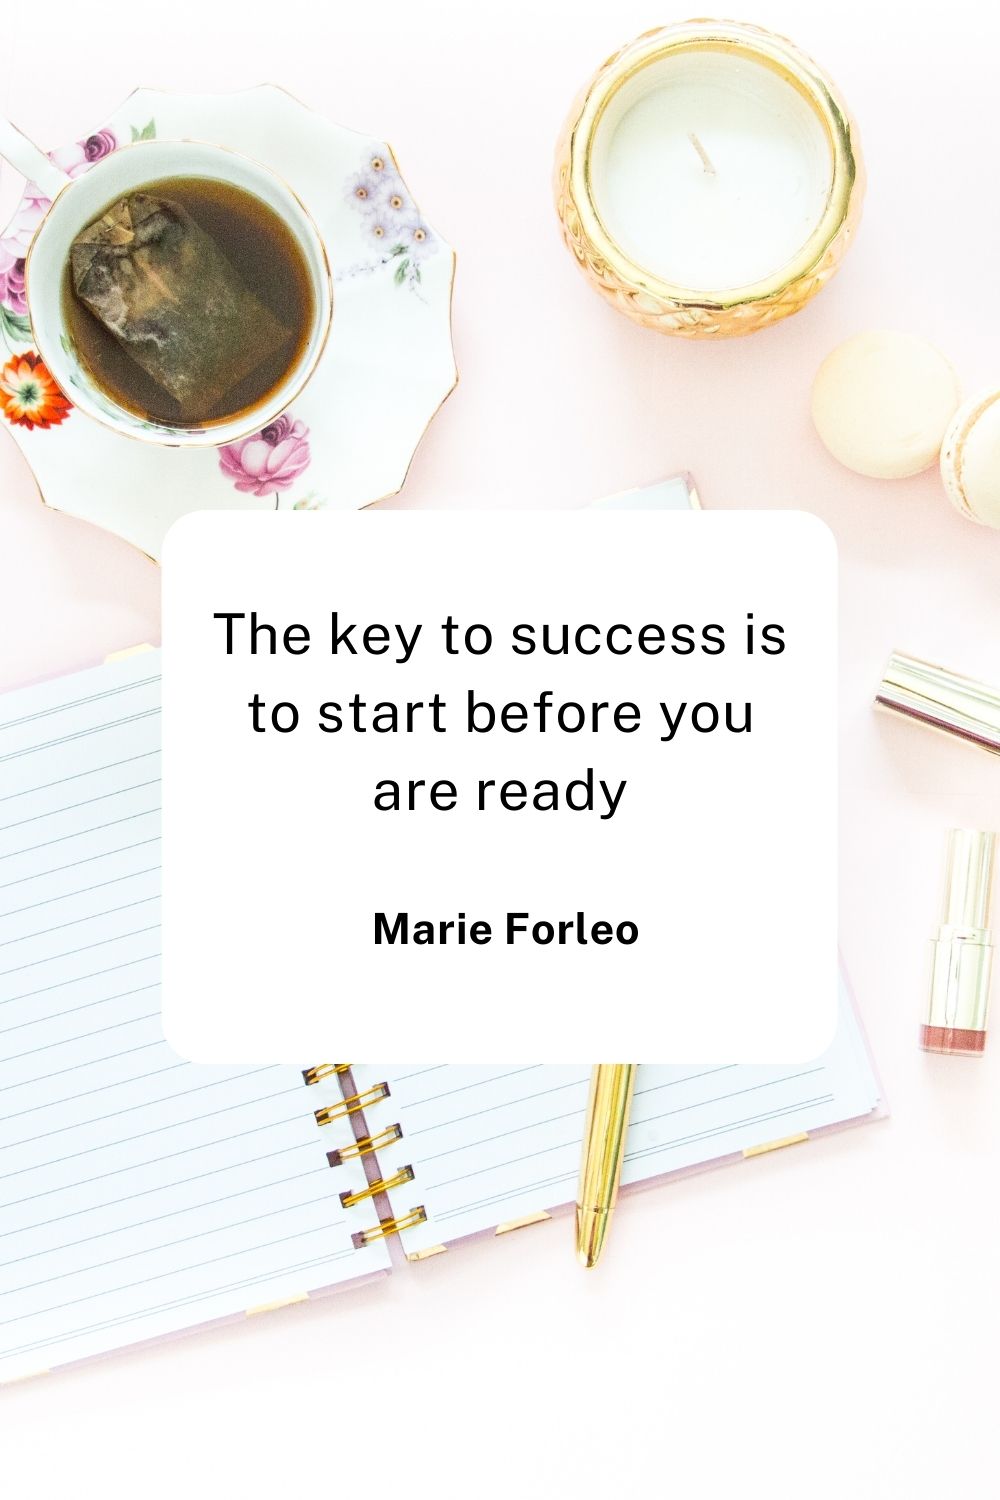 The key to success is to start before you are ready